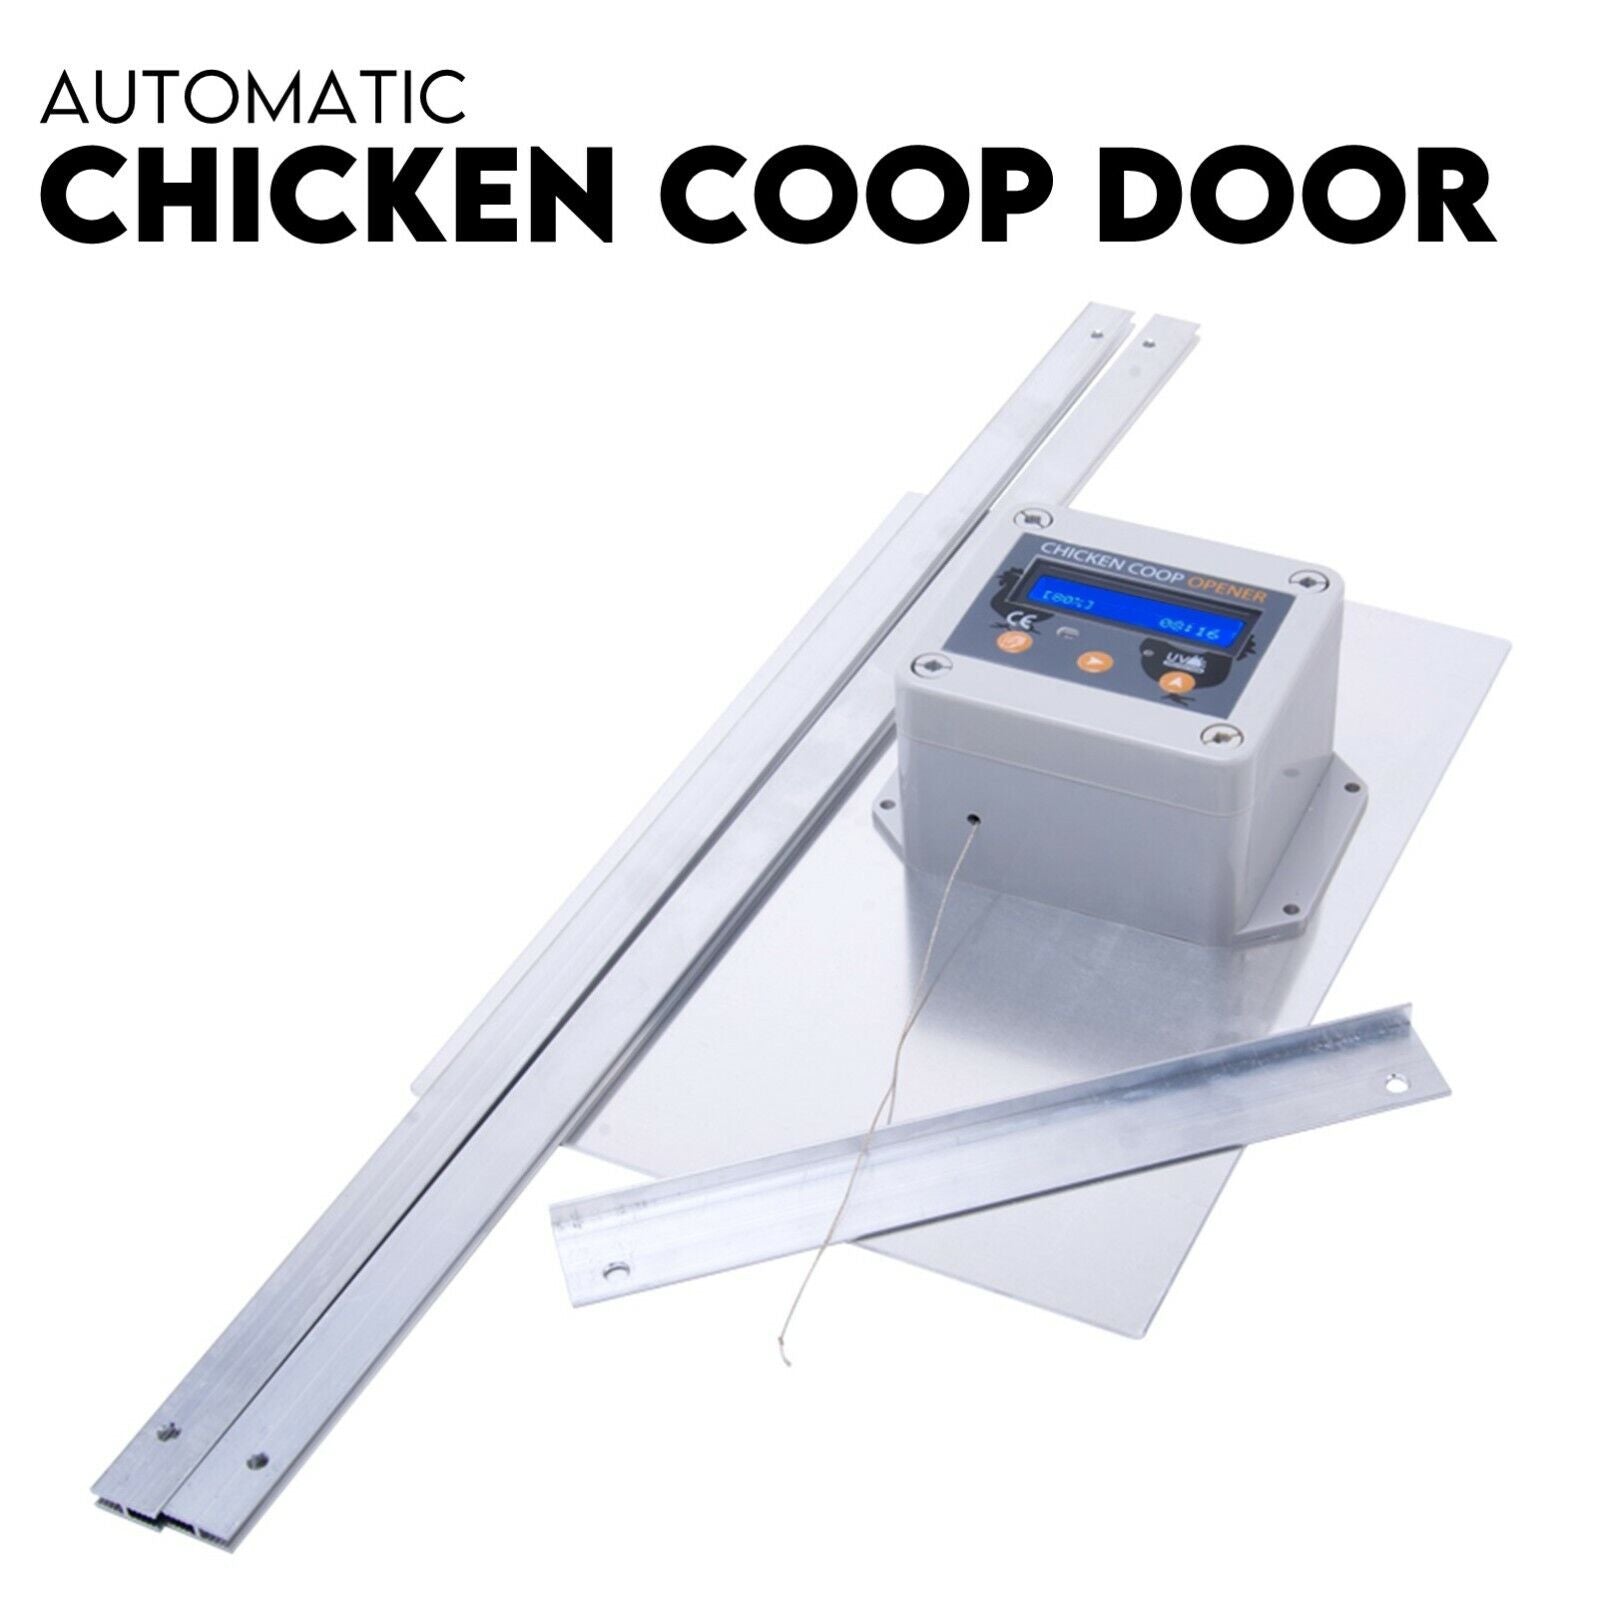 Chicken Coop Door with Digital LCD Screen to manage Timer and Sensor - SILBERSHELL